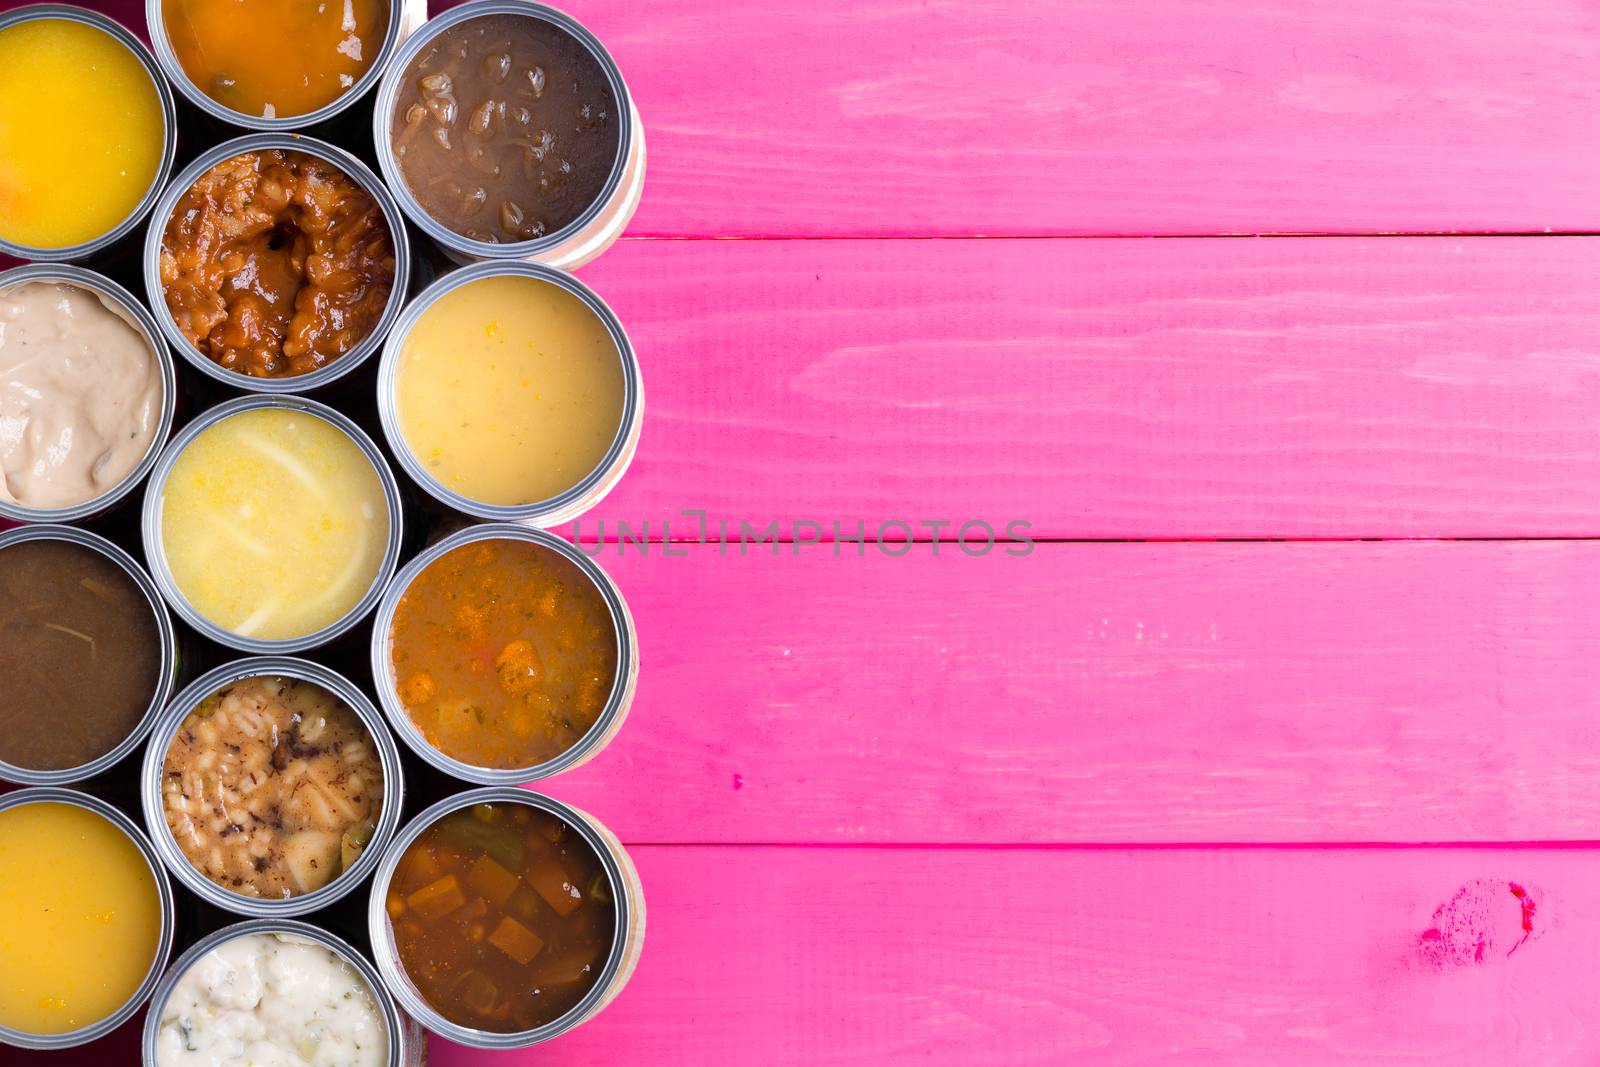 Open Cans of Soup on Bright Pink Background by coskun